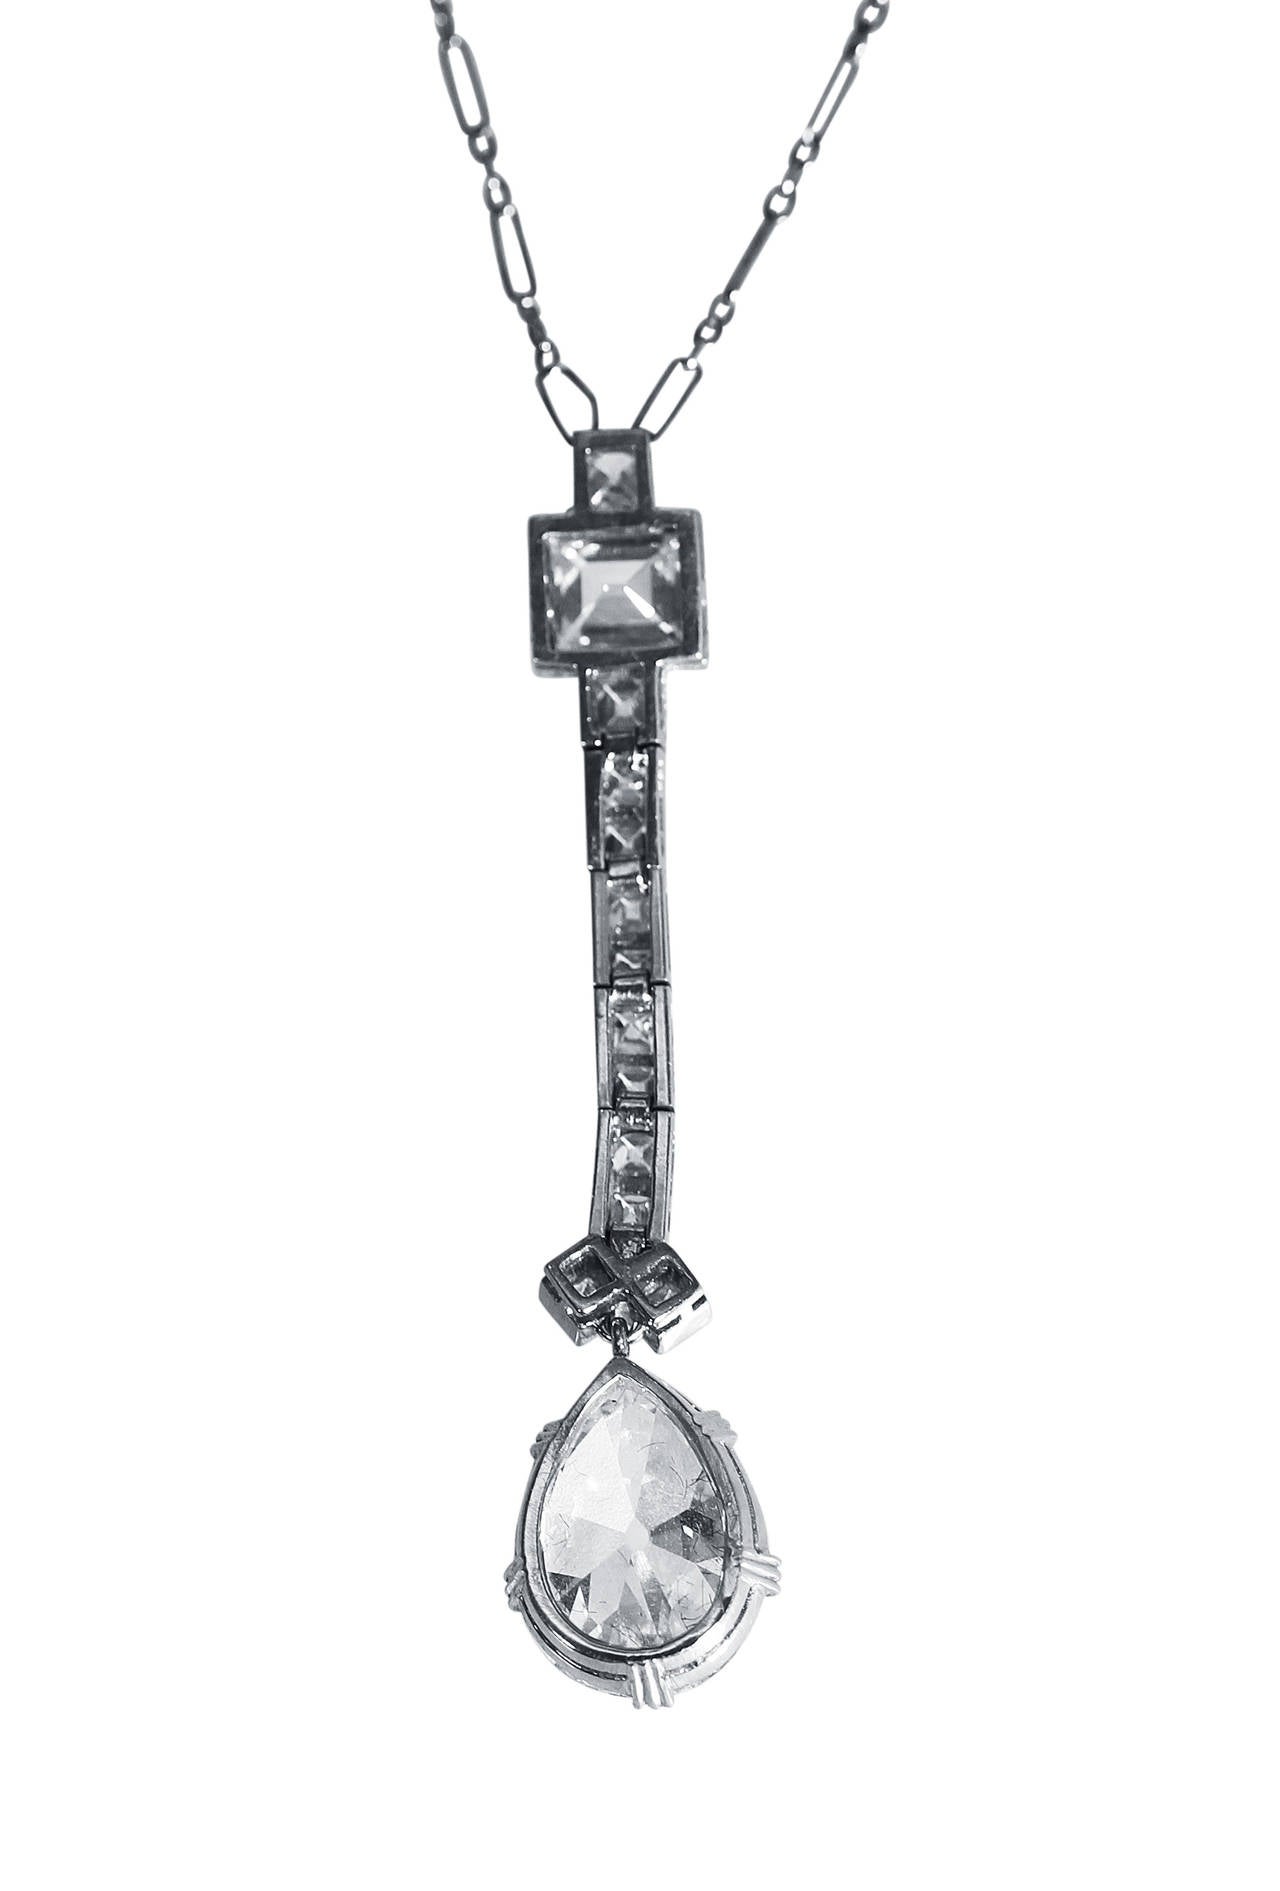 An Art Deco platinum and diamond pendant necklace, circa 1925, the articulated pendant set with an old pear-shaped diamond 2.70 carats, surmounted by 12 French-cut, 1 round and 1 step-cut diamond weighing approximately 1.30 carats, completed by a